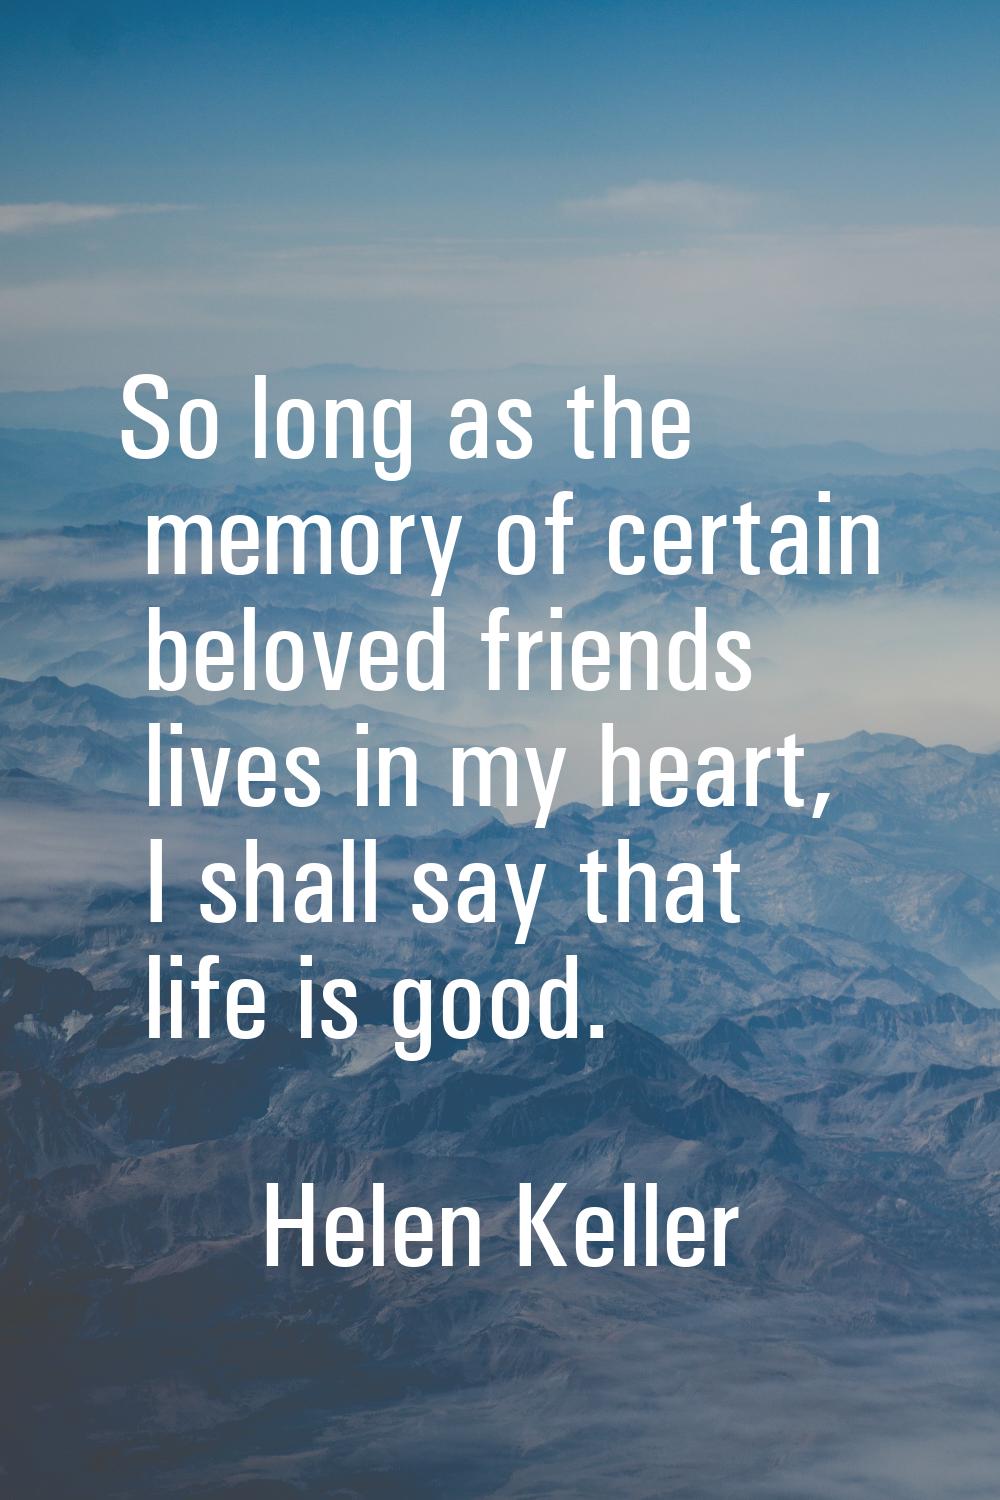 So long as the memory of certain beloved friends lives in my heart, I shall say that life is good.